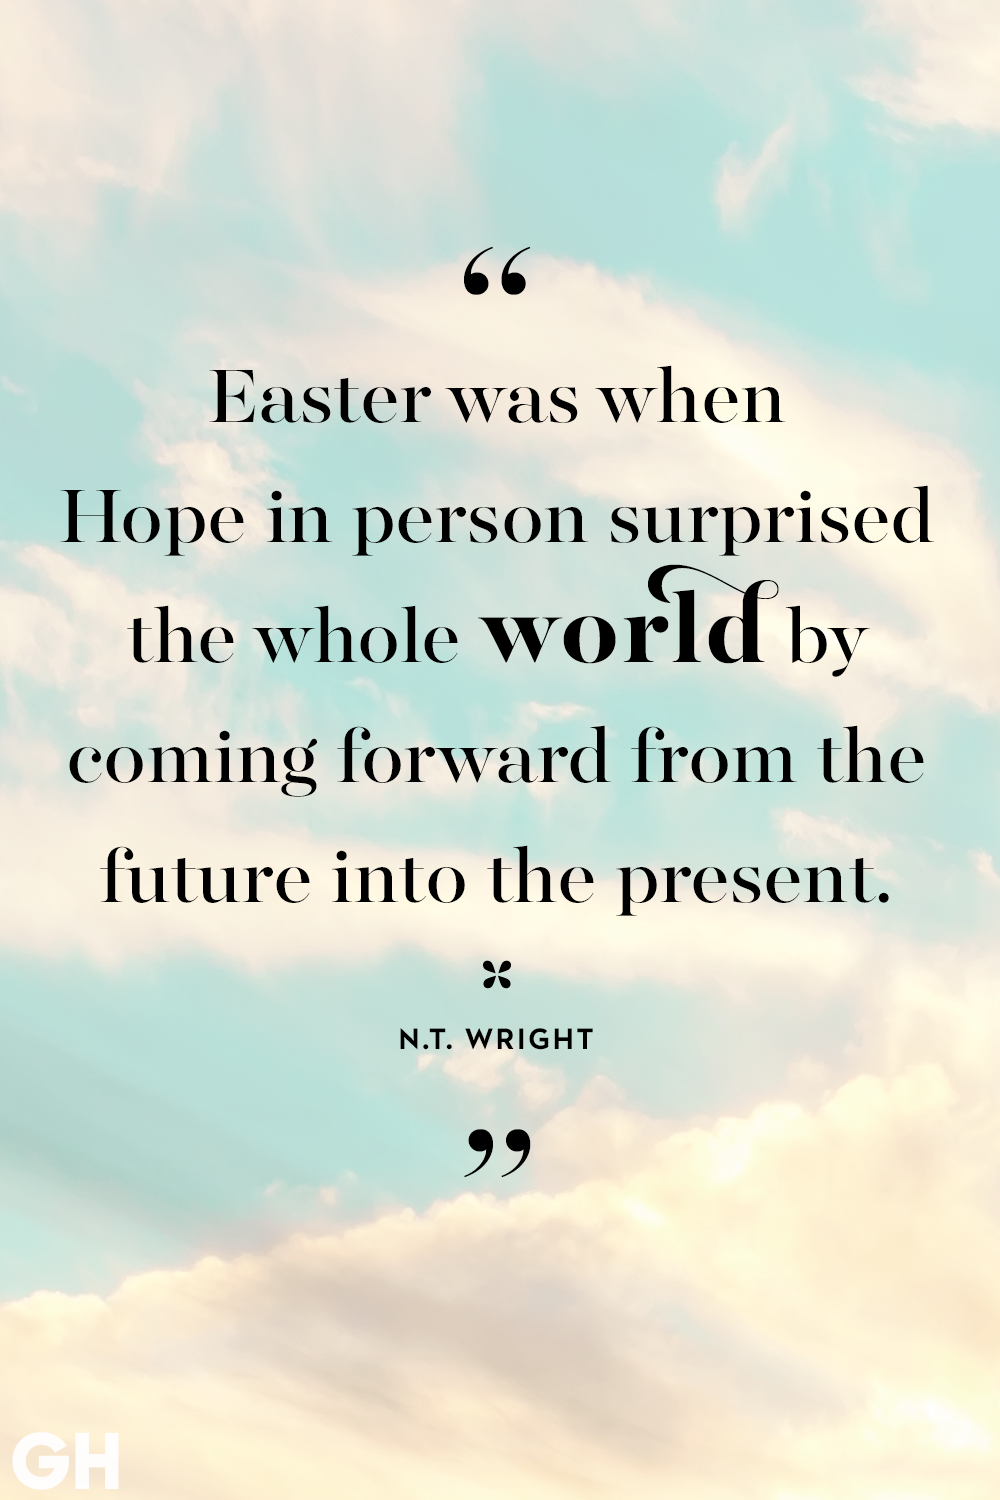 50 Best Easter Quotes 2023 - Inspirational Easter Sayings 2023